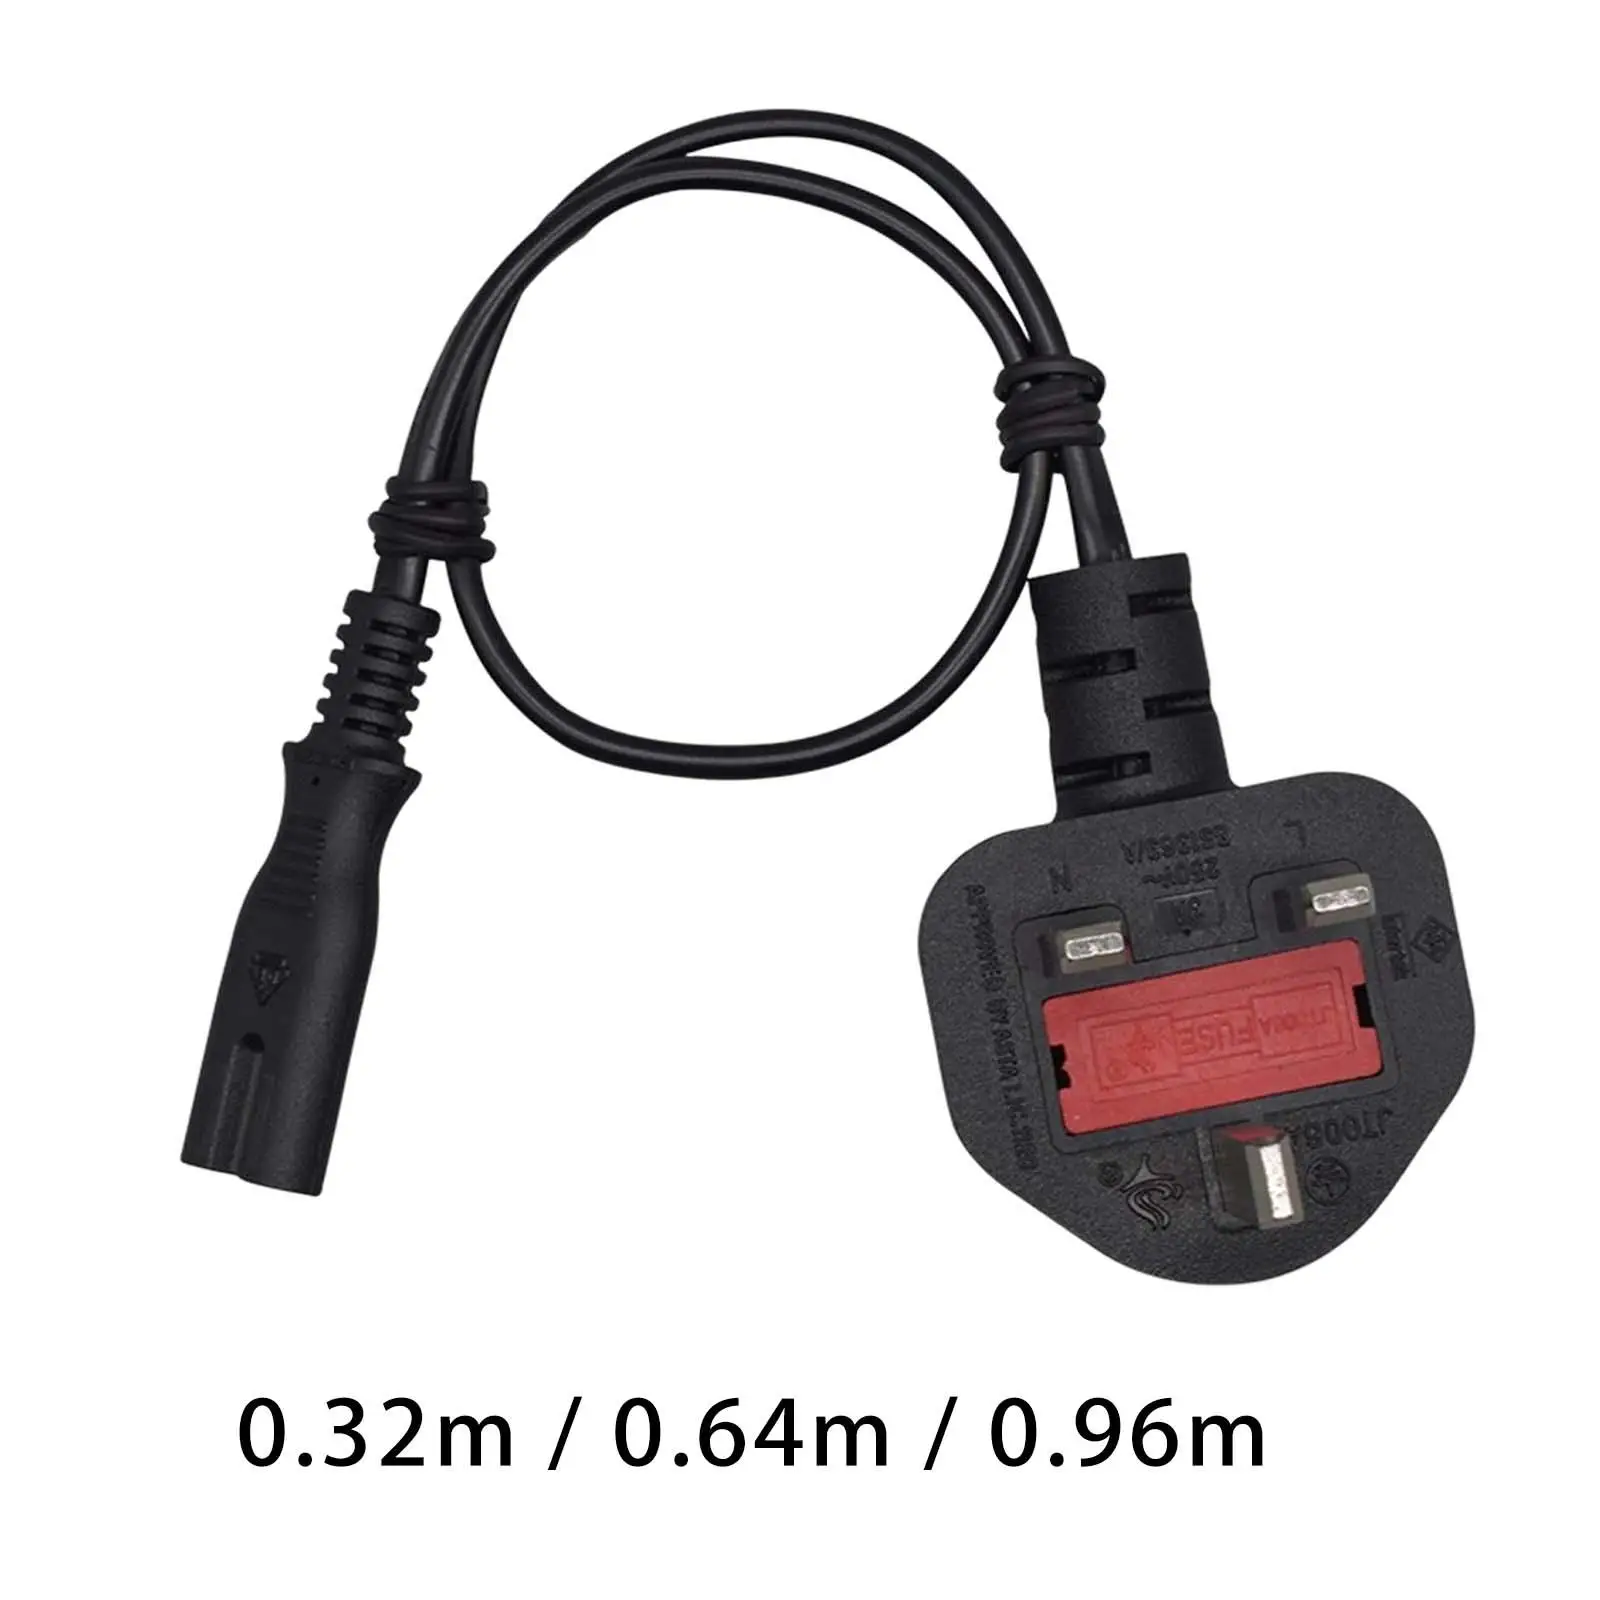 2 Pin Fig 8   Power Cord BS1363 Male to C7 Female 13A 250V 2500W Bl k Connector for PC Laptop Game Console Travel